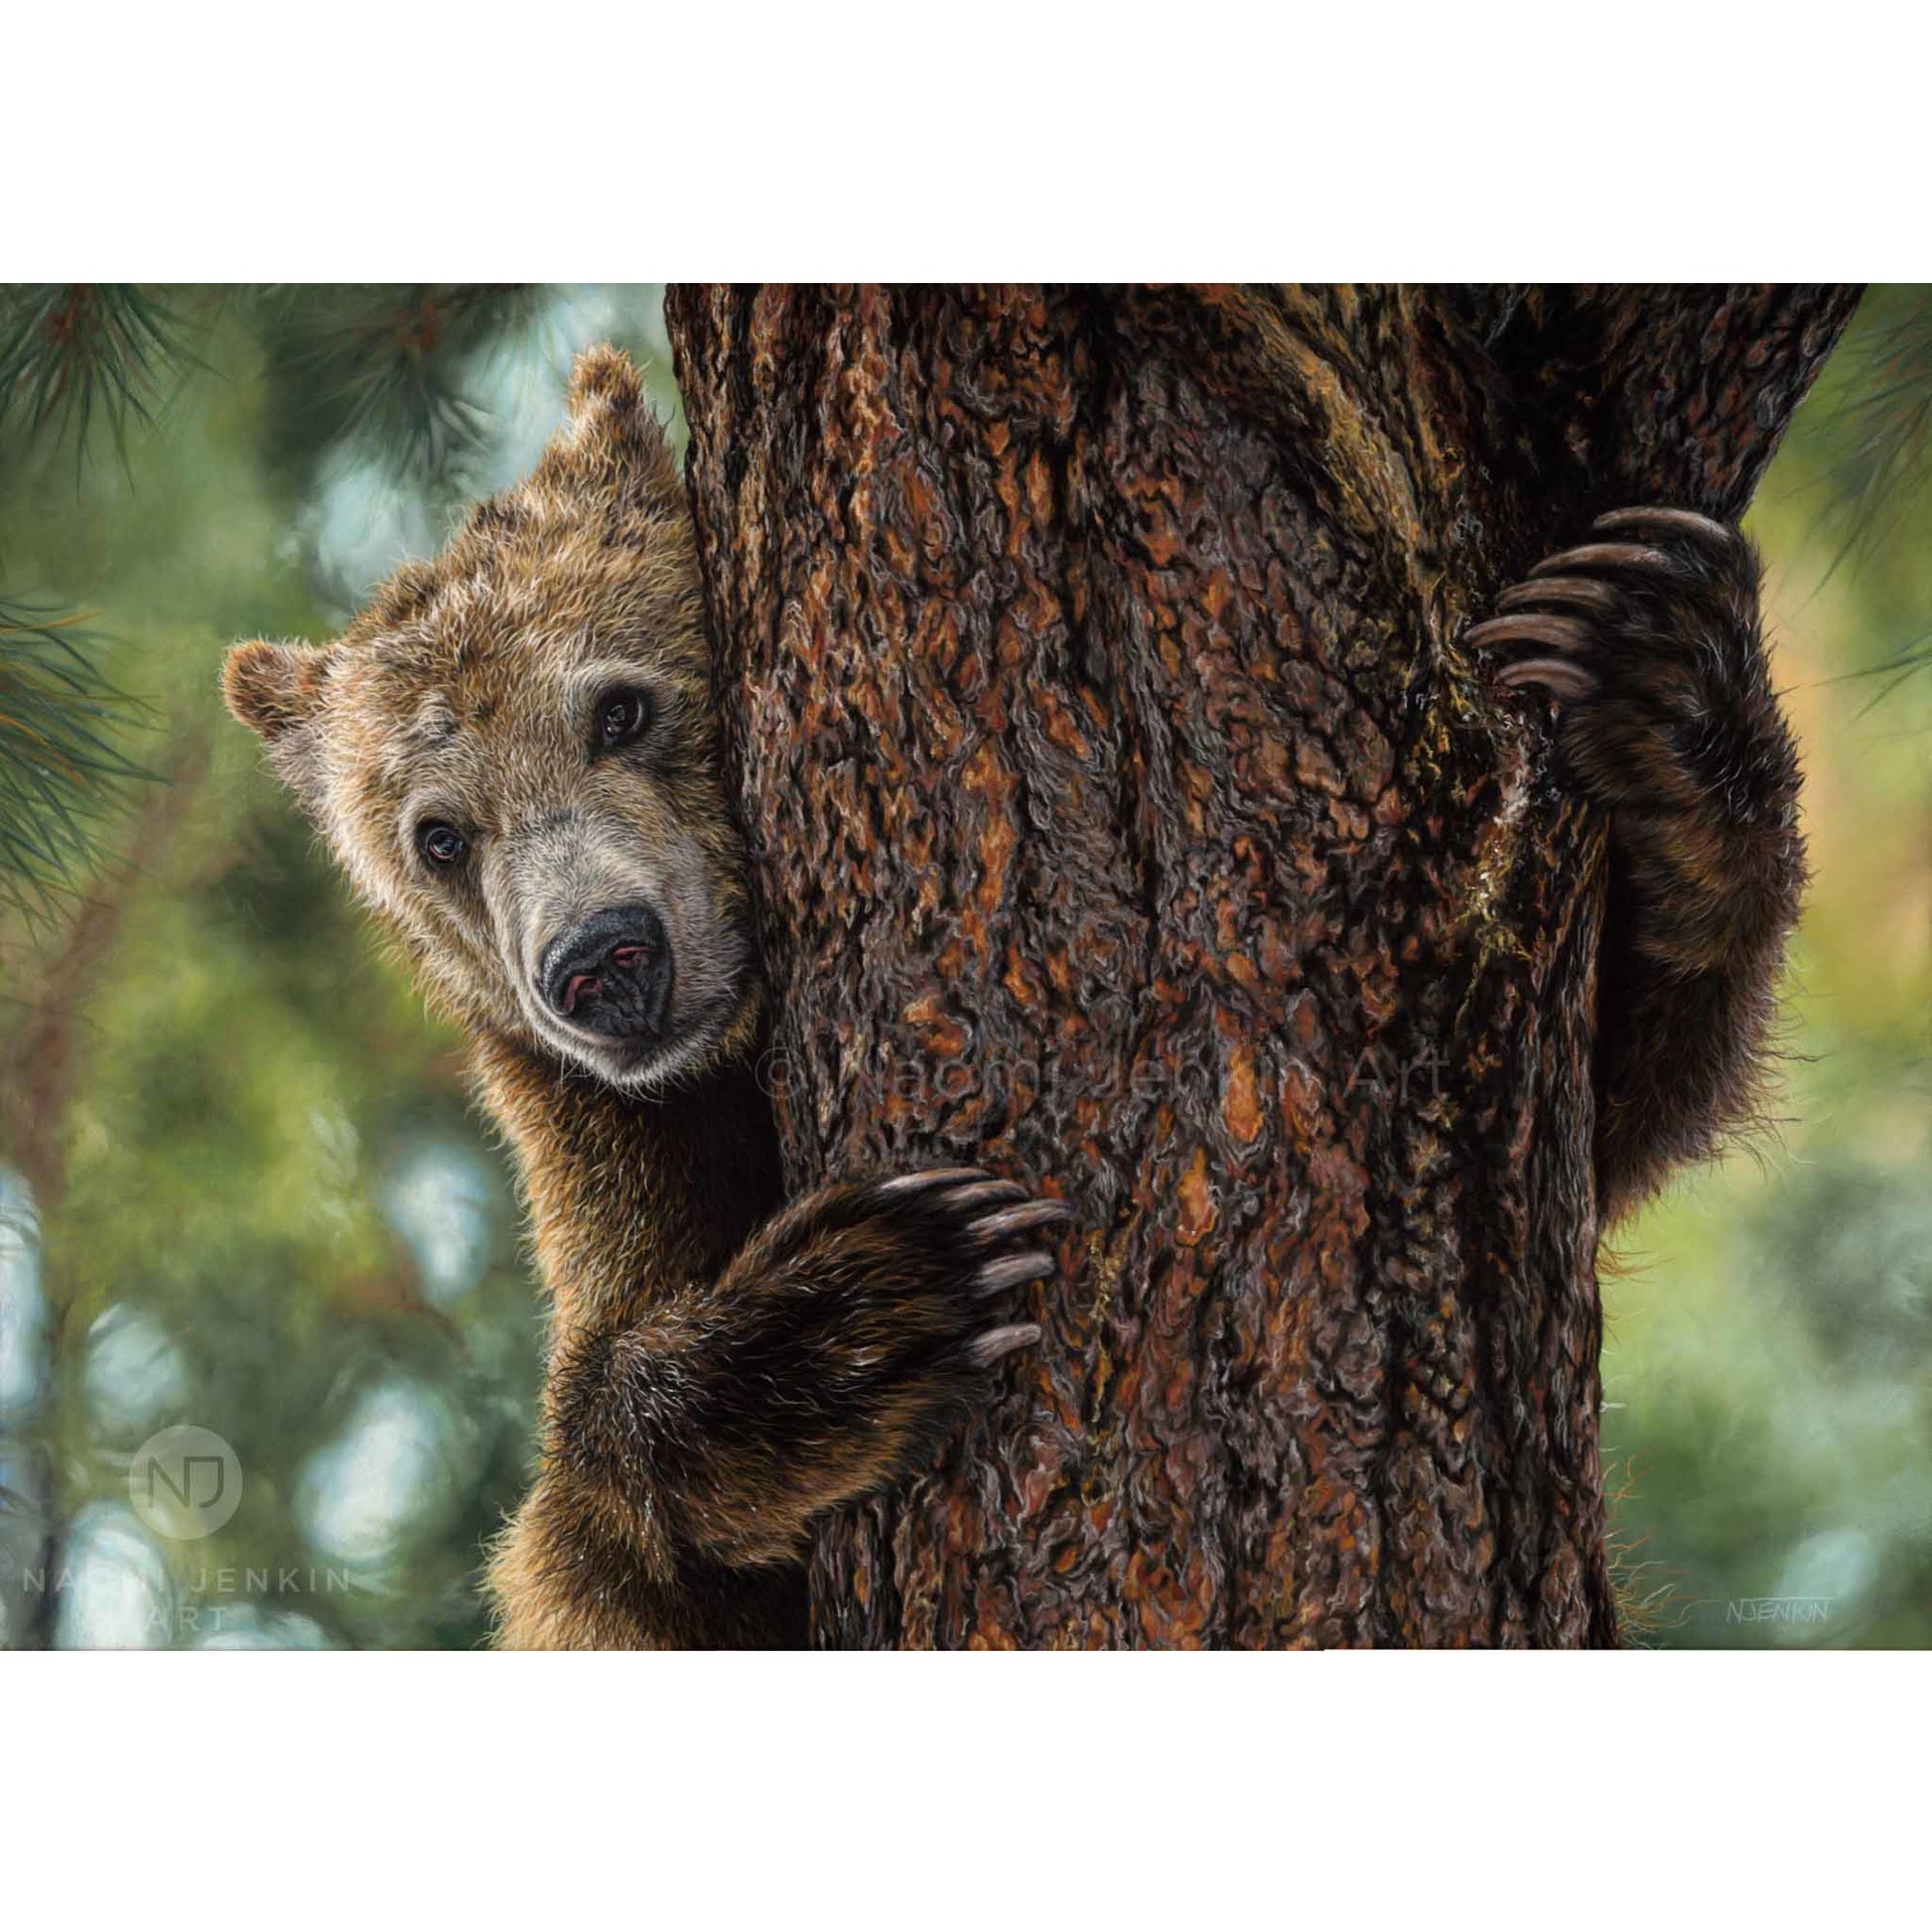 Wildlife art drawing of a grizzly bear by Naomi Jenkin Art. 